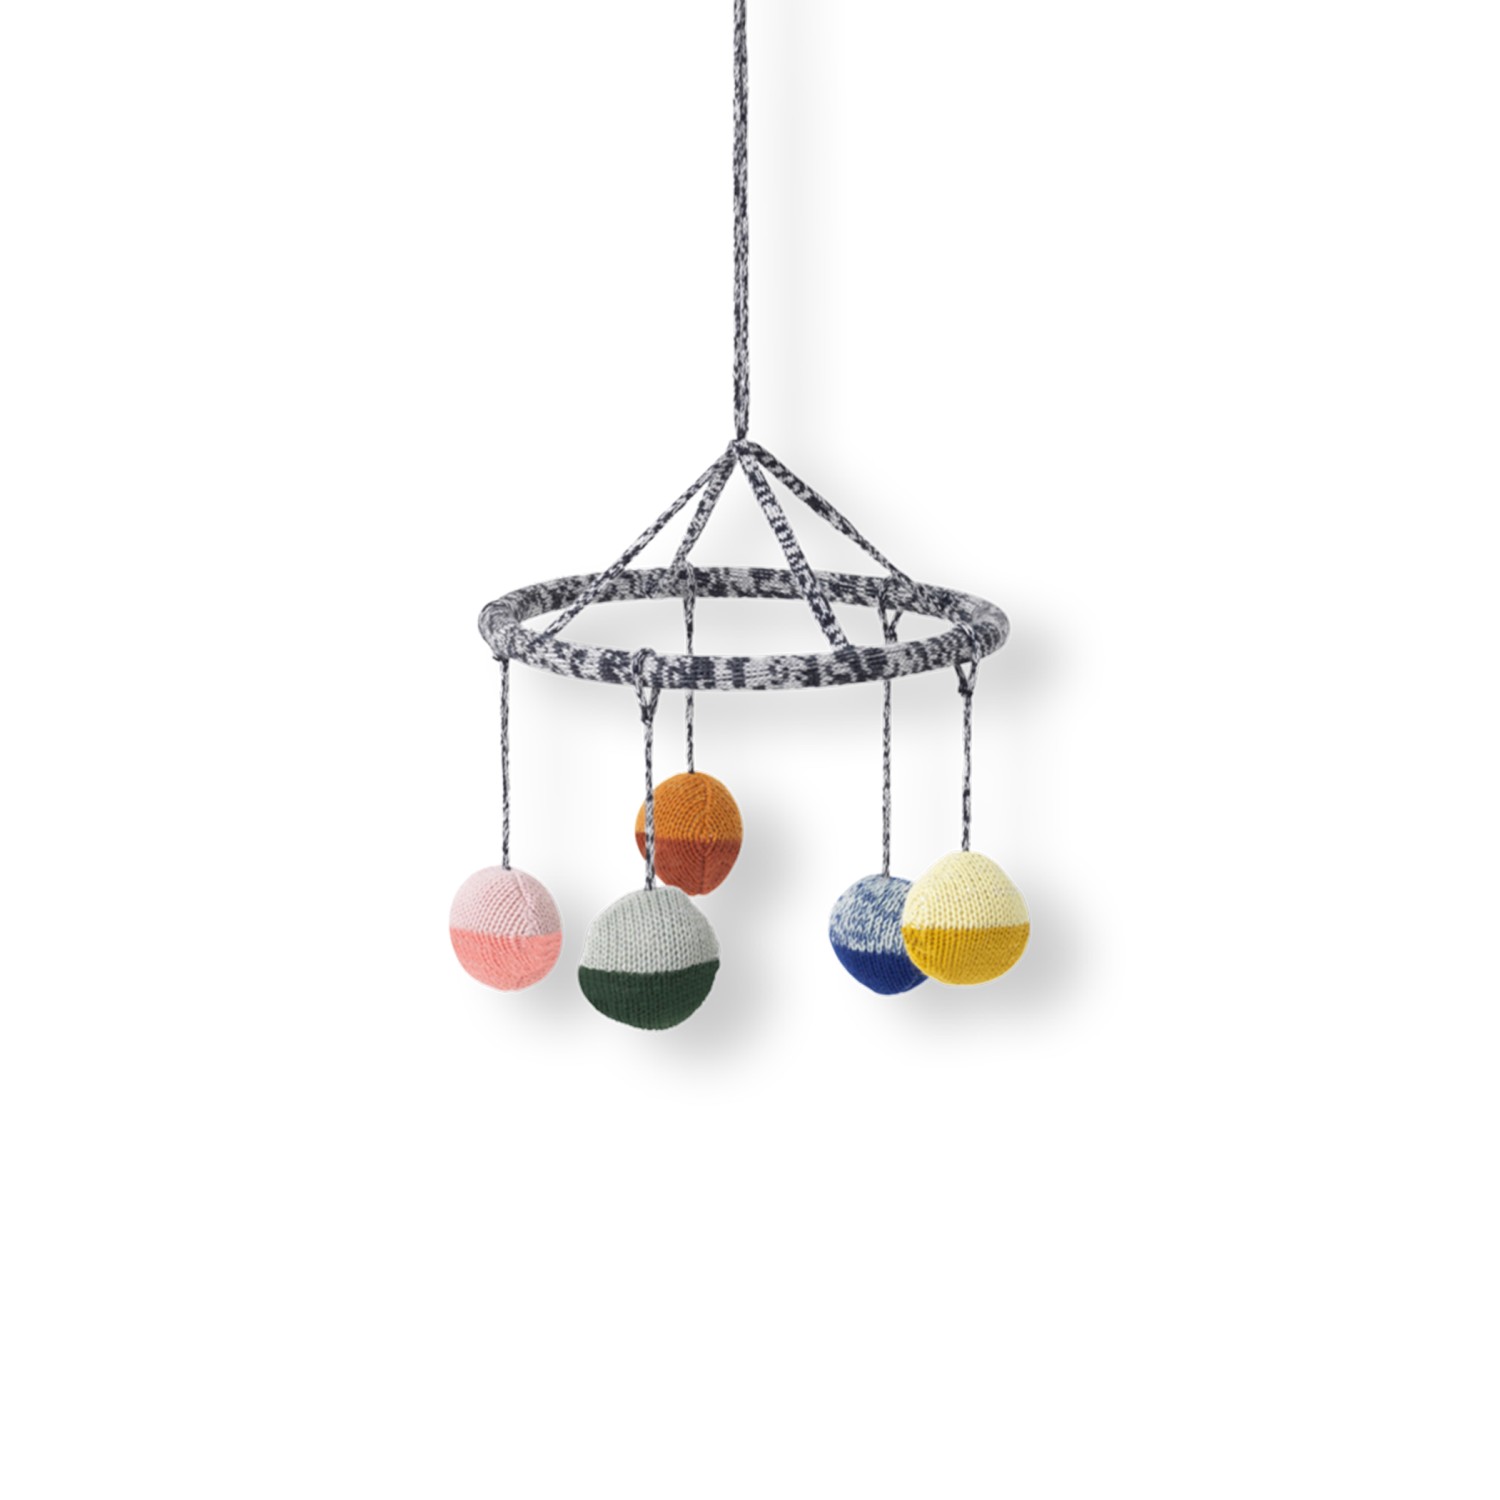 Ball Knitted Hanging Mobile